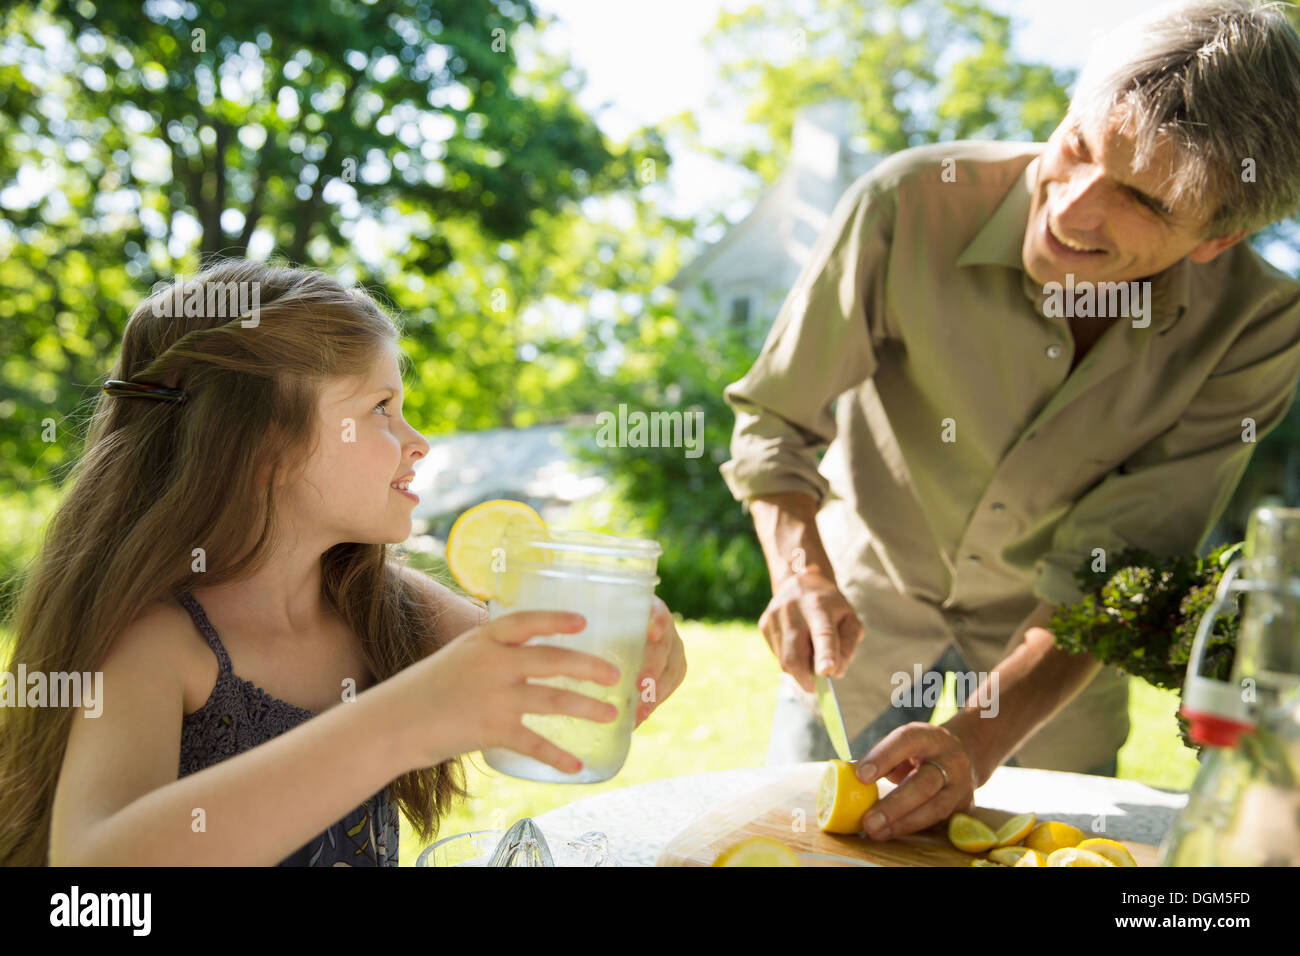 On the farm. Children and adults working together. A girl and an adult man making lemonade. Cutting up fresh fruits. Stock Photo